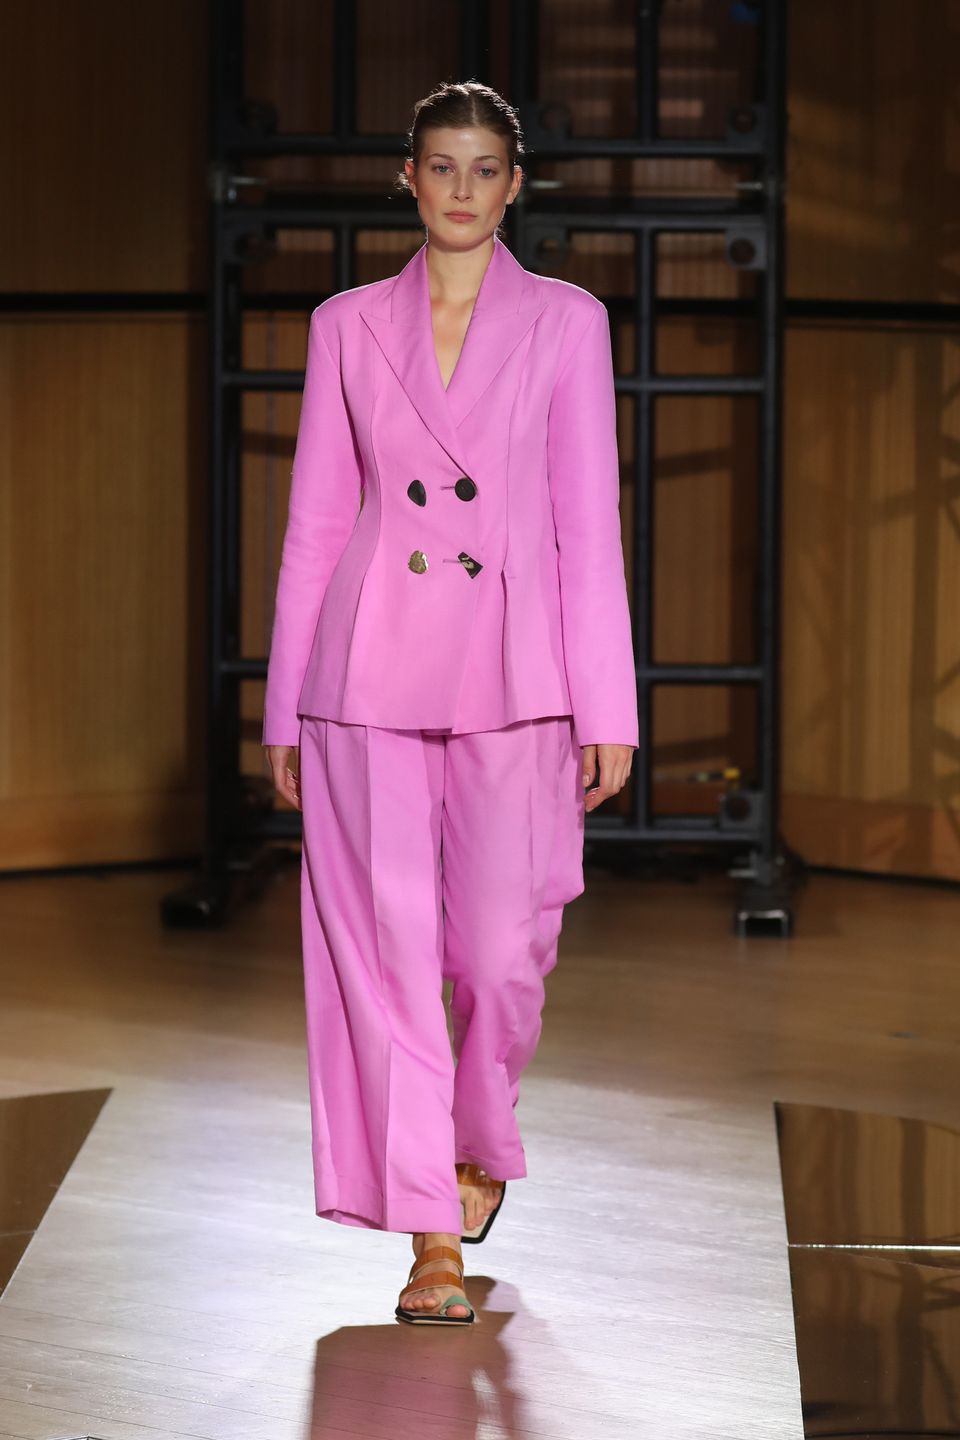 Hot Pink Is Extra Hot Right Now. Here's Proof. | HuffPost Life